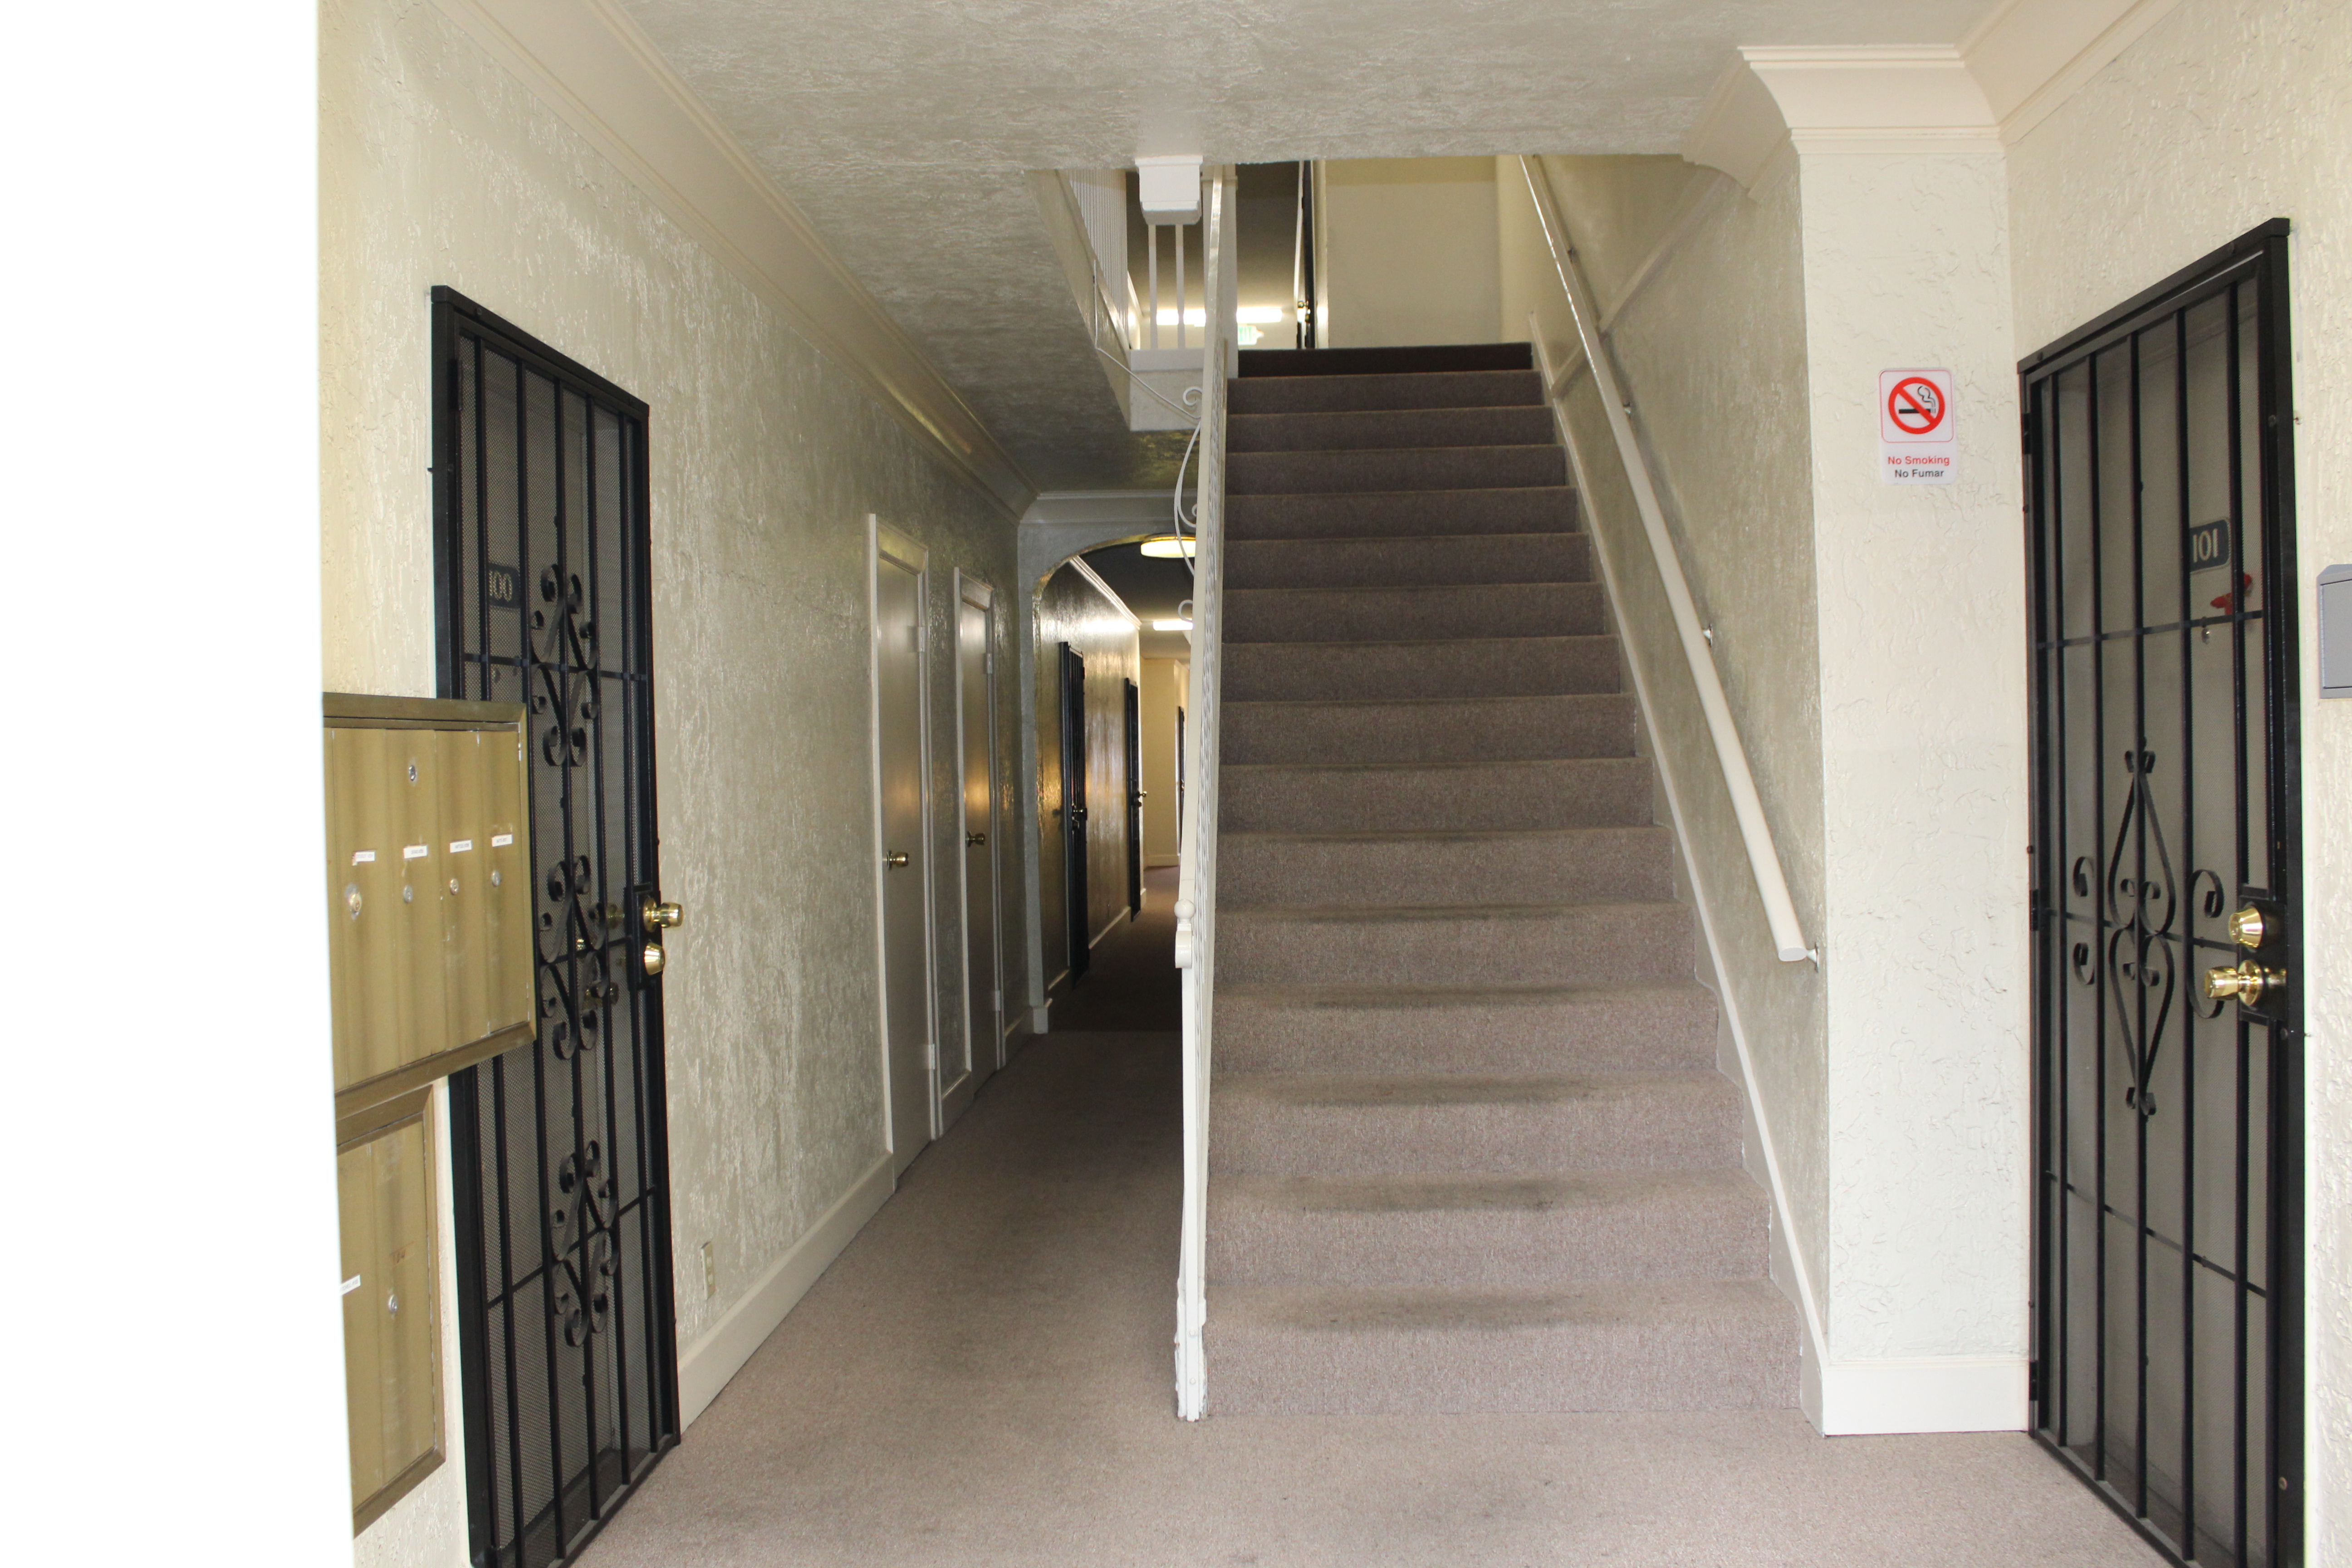 Small lobby area with mailboxes on the right hand side, stairs on the left hand side, and unit doors along the corridor.